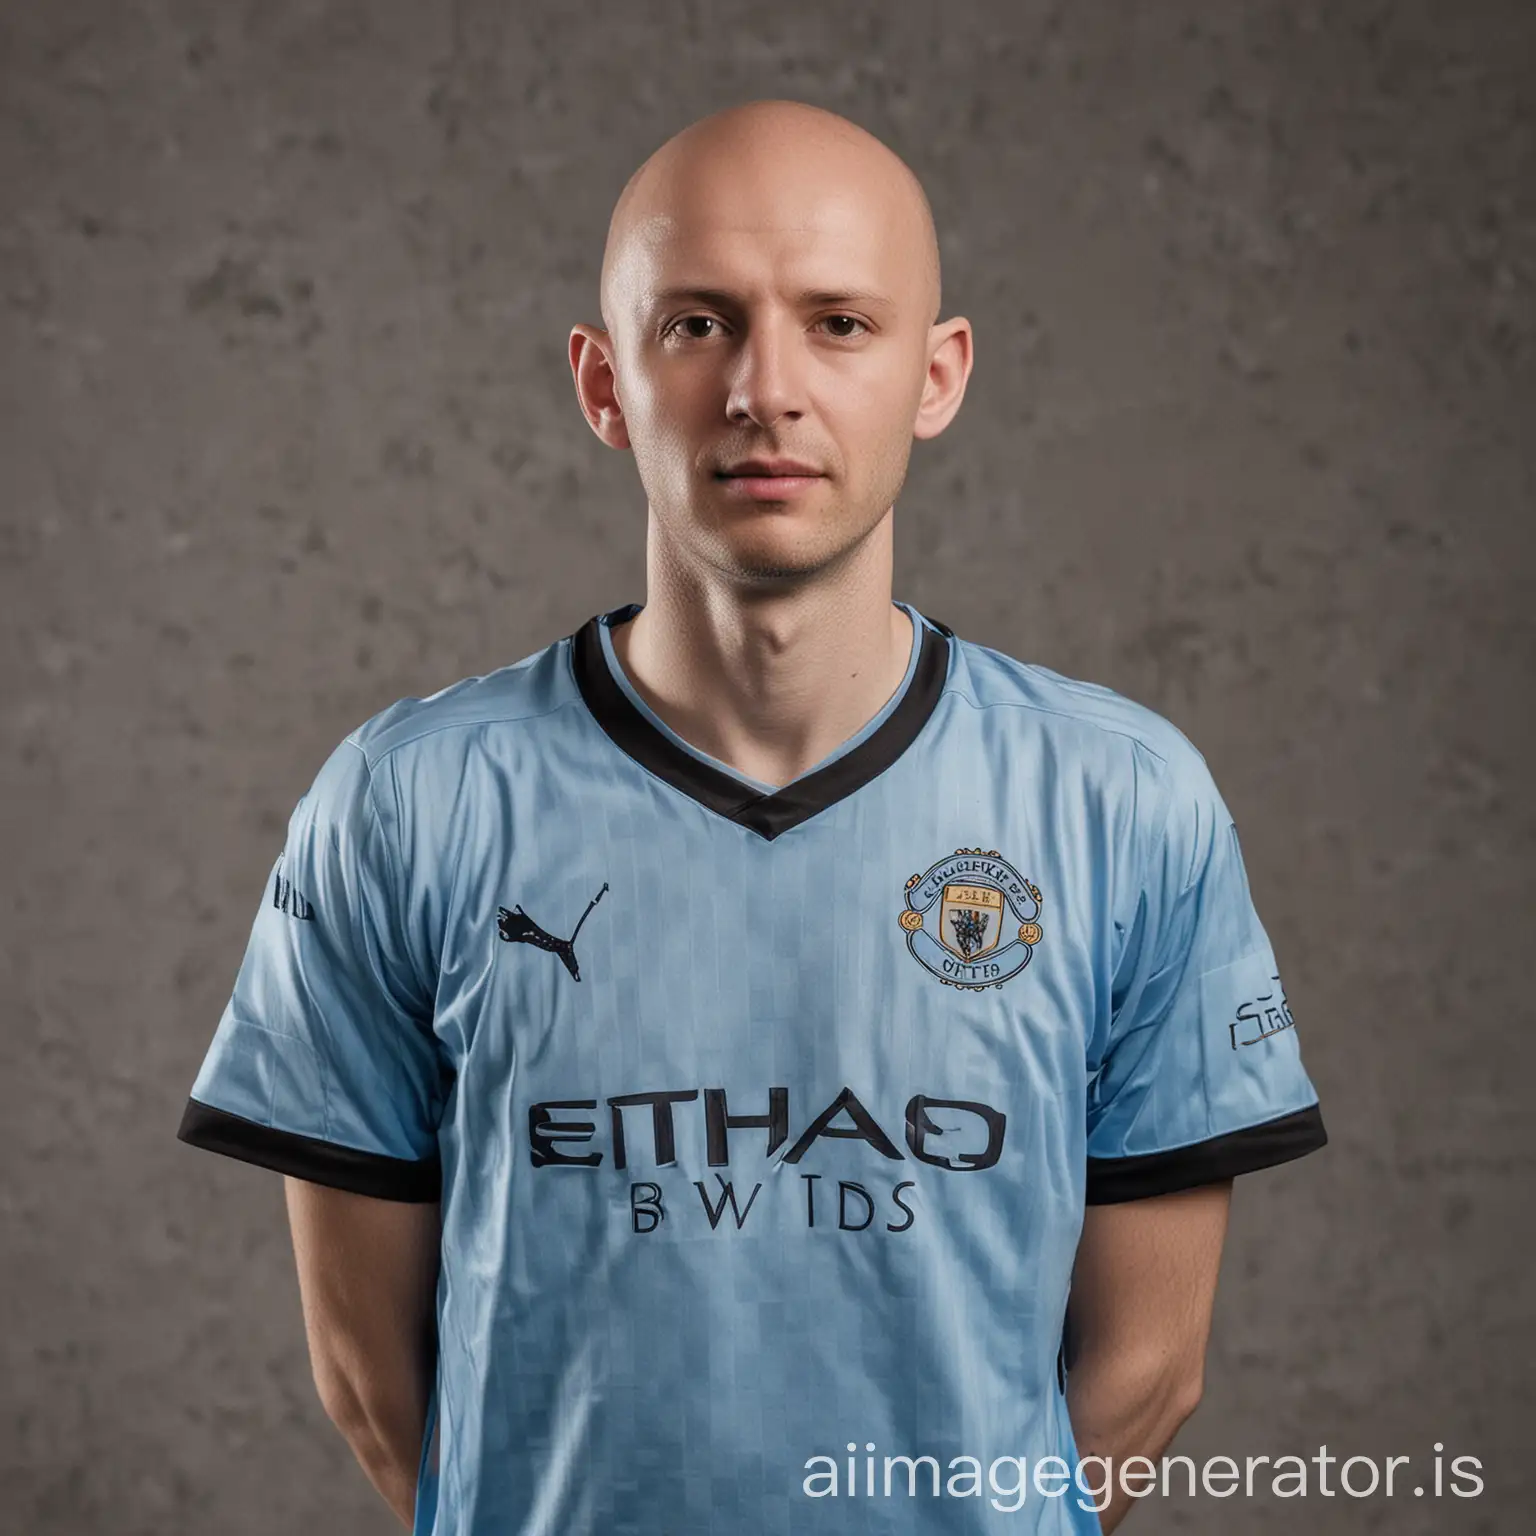 Contradictory-Fan-Identity-Bald-Manchester-United-Fan-in-Manchester-City-Kit